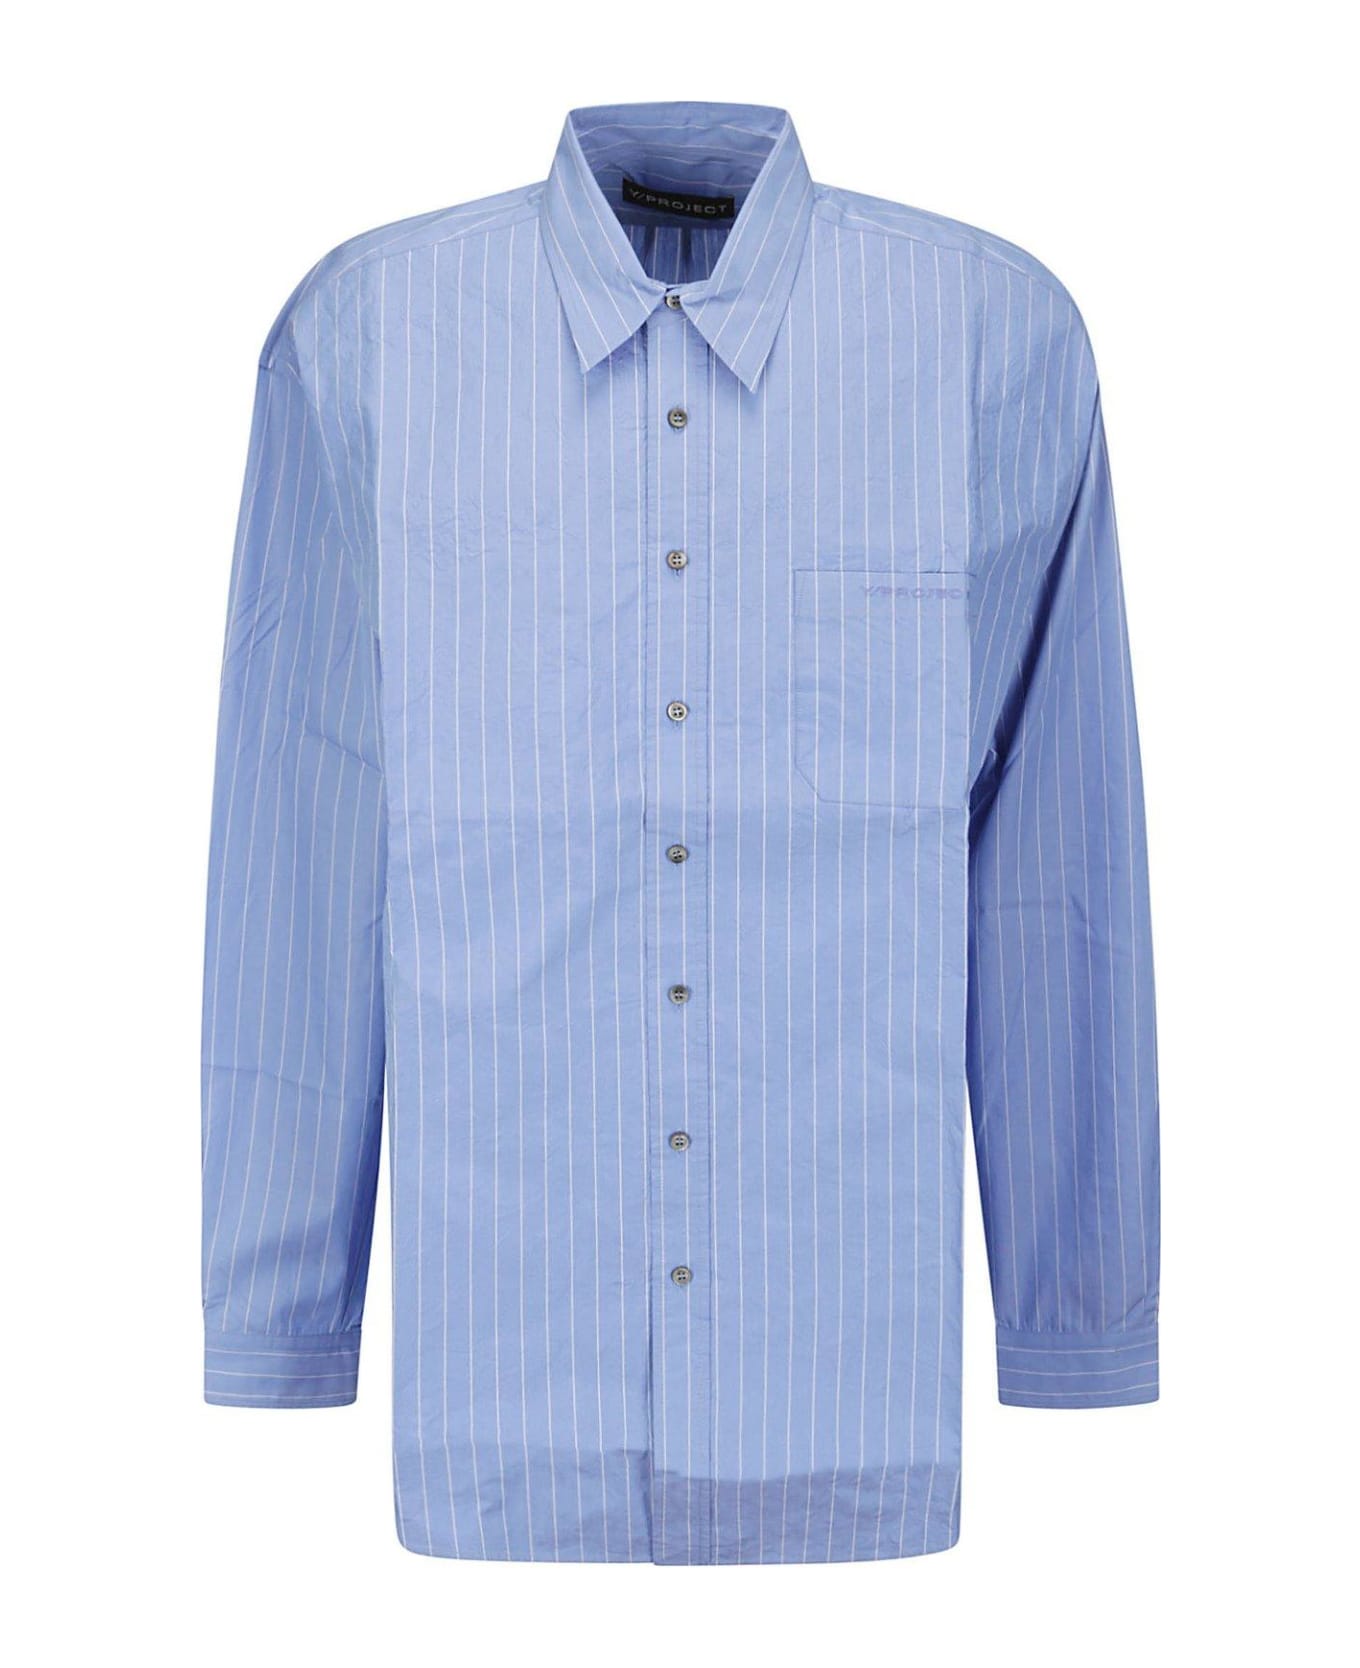 Y/Project Striped Buttoned Shirt - BLUE シャツ